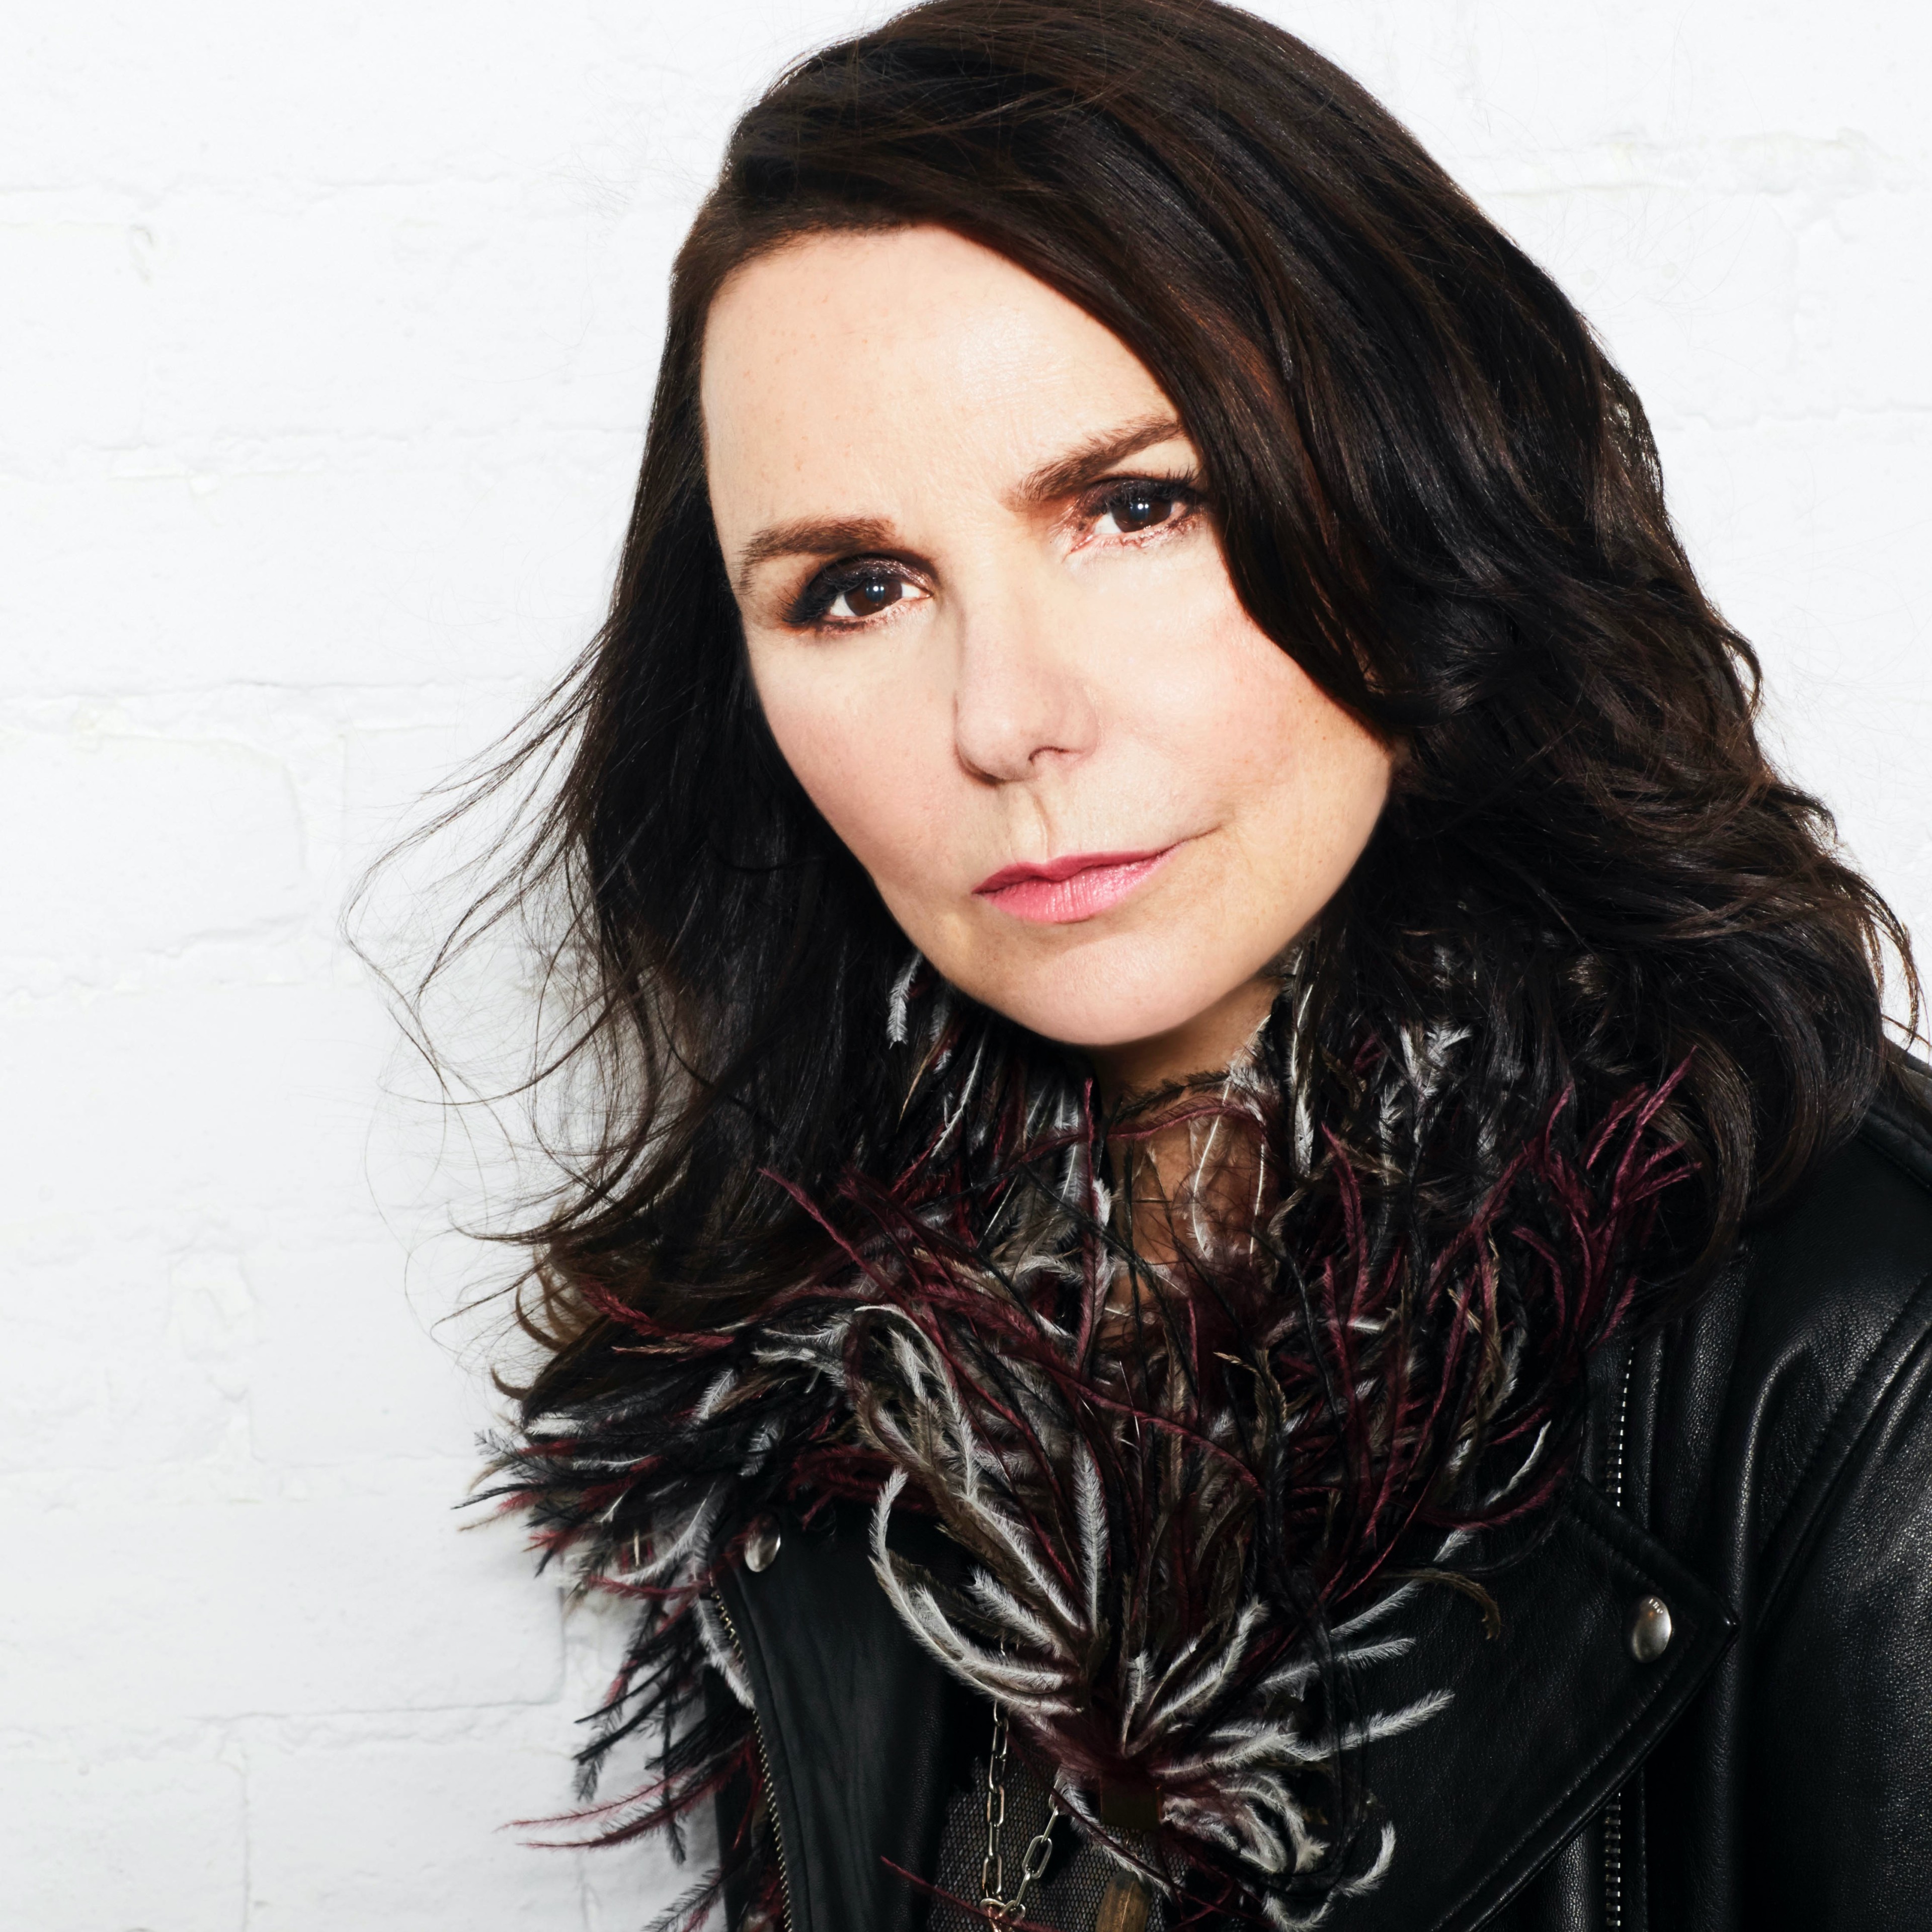 Patty Smyth Returns With “Drive,” A Reflective New Song From Upcoming Release ‘It’s About Time’